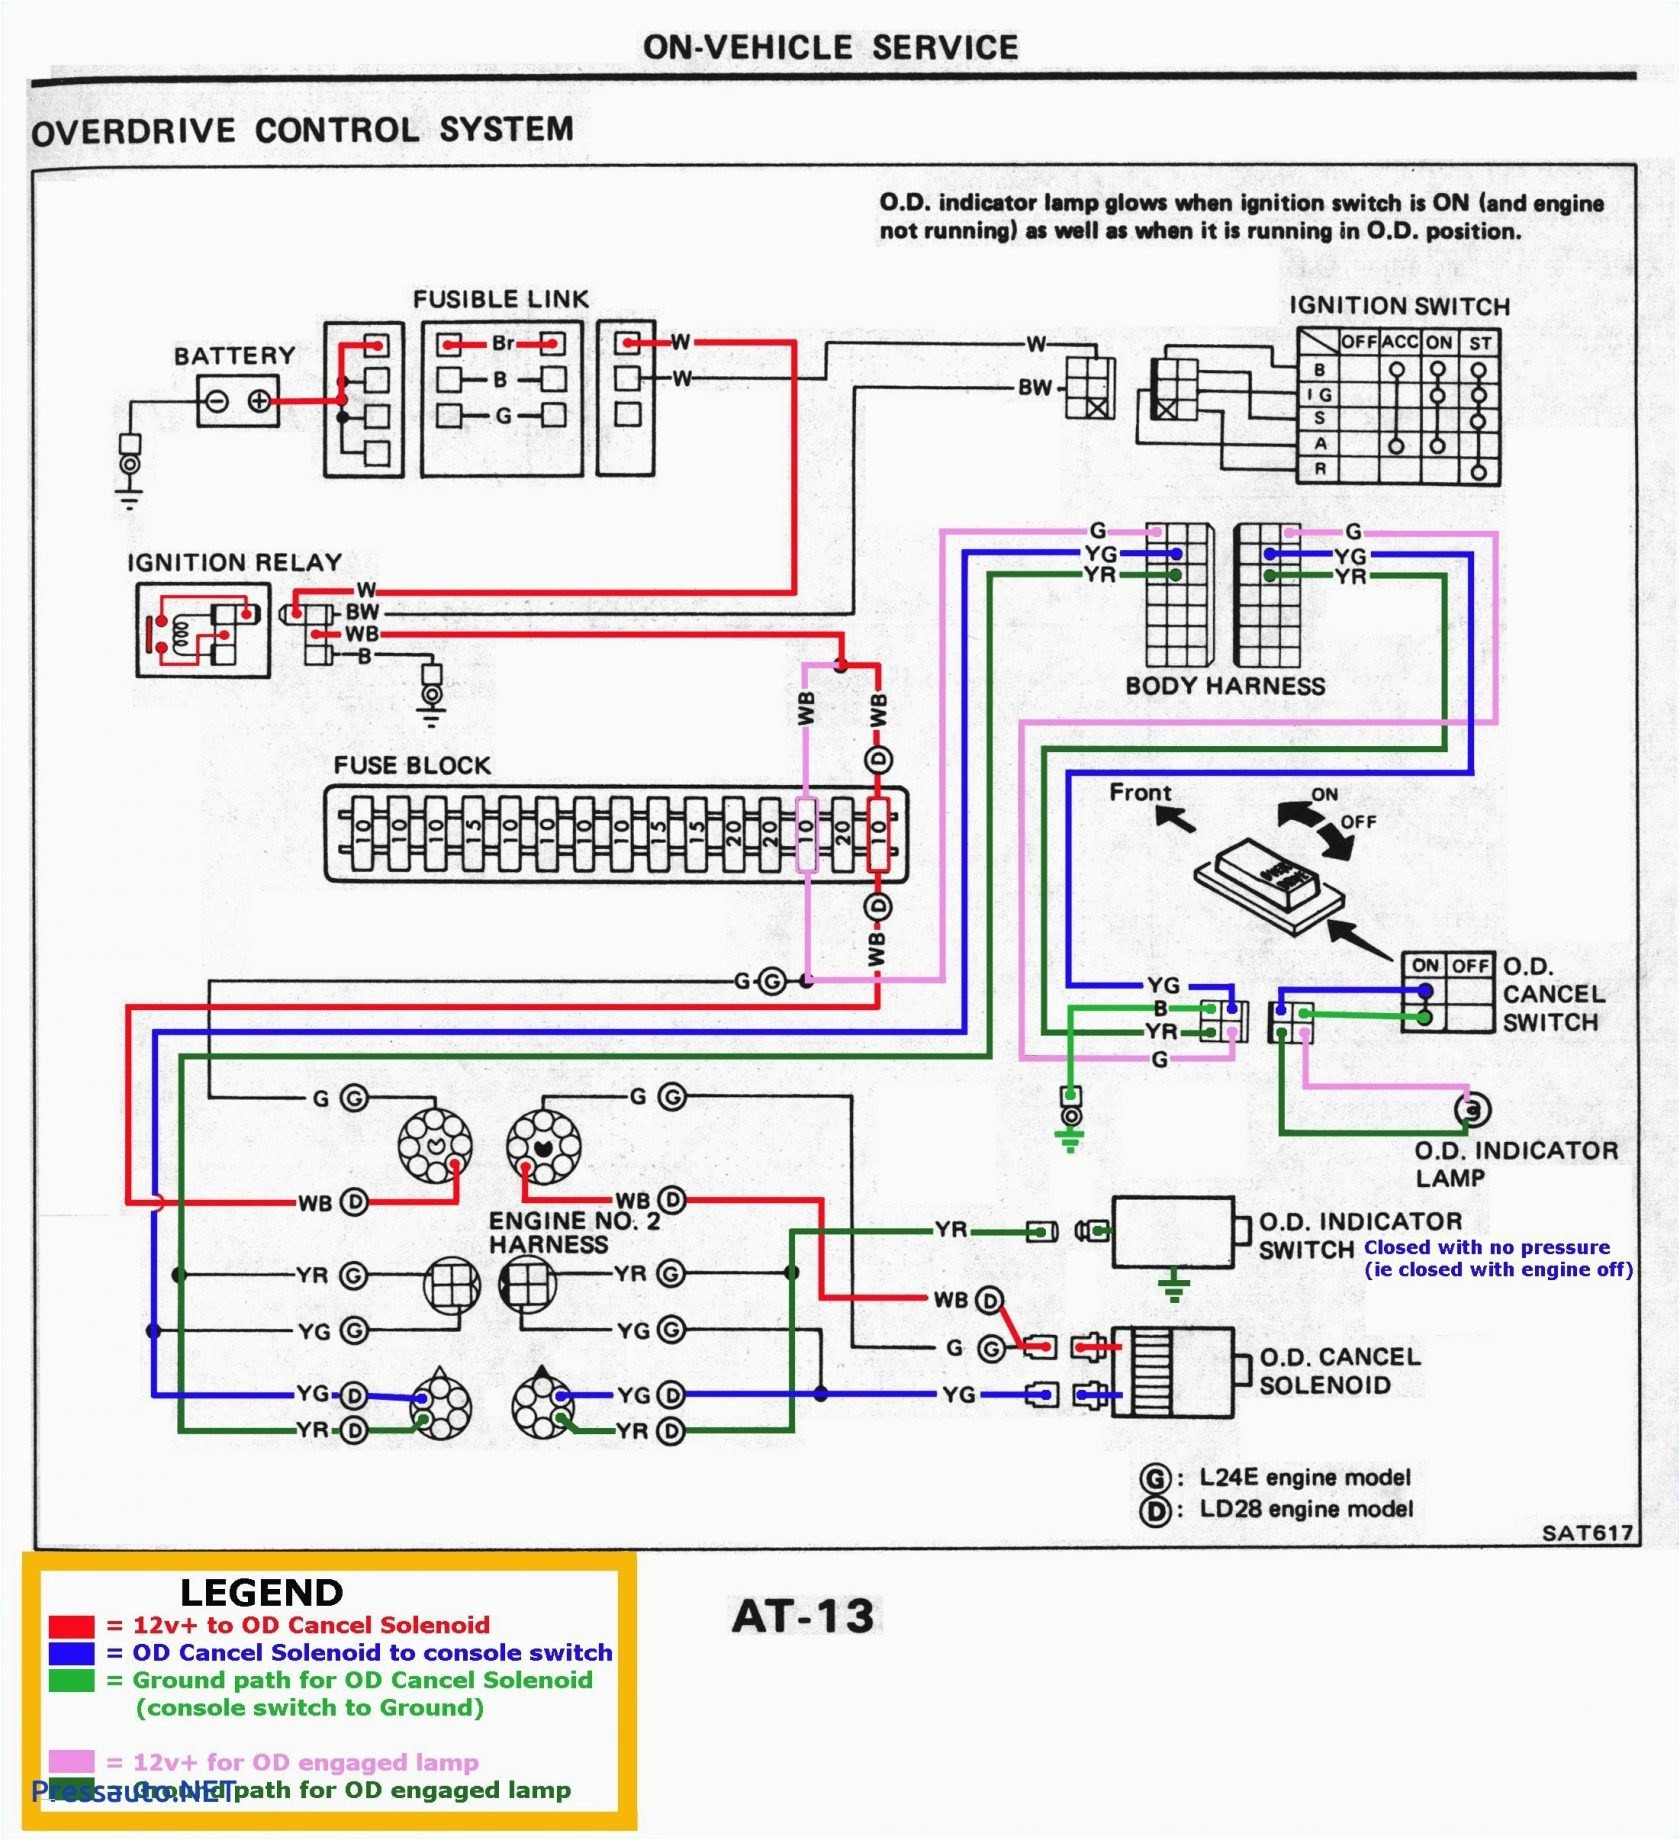 pictures gallery of reverse light wiring diagram awesome relay pin out lovely nos relay wiring diagram inspirationa car